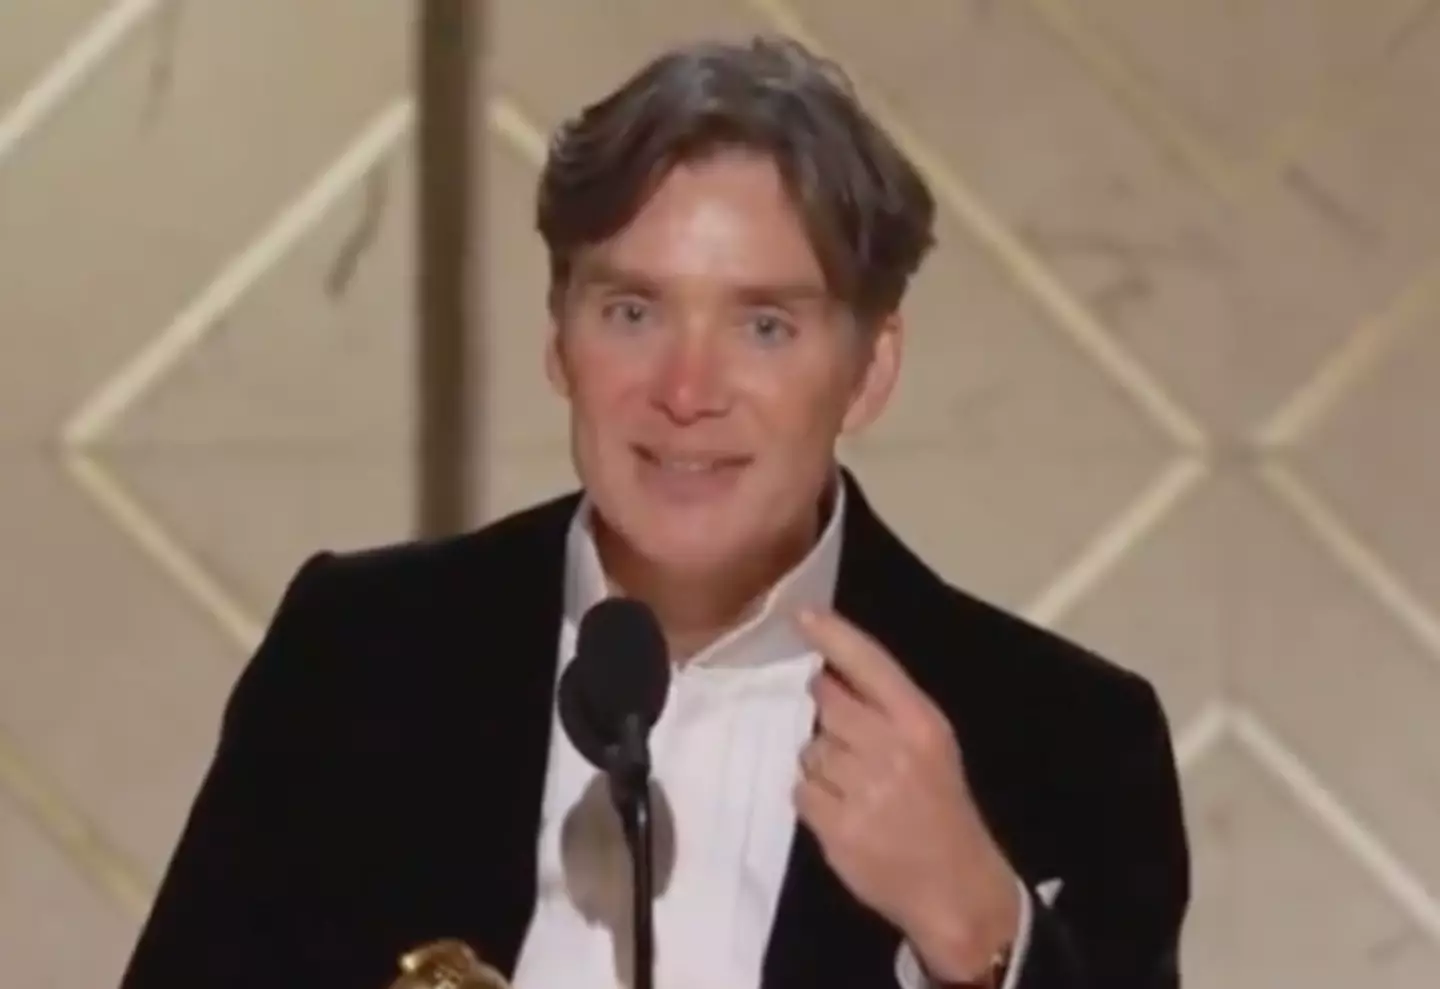 Cillian Murphy commented on his unusual look.